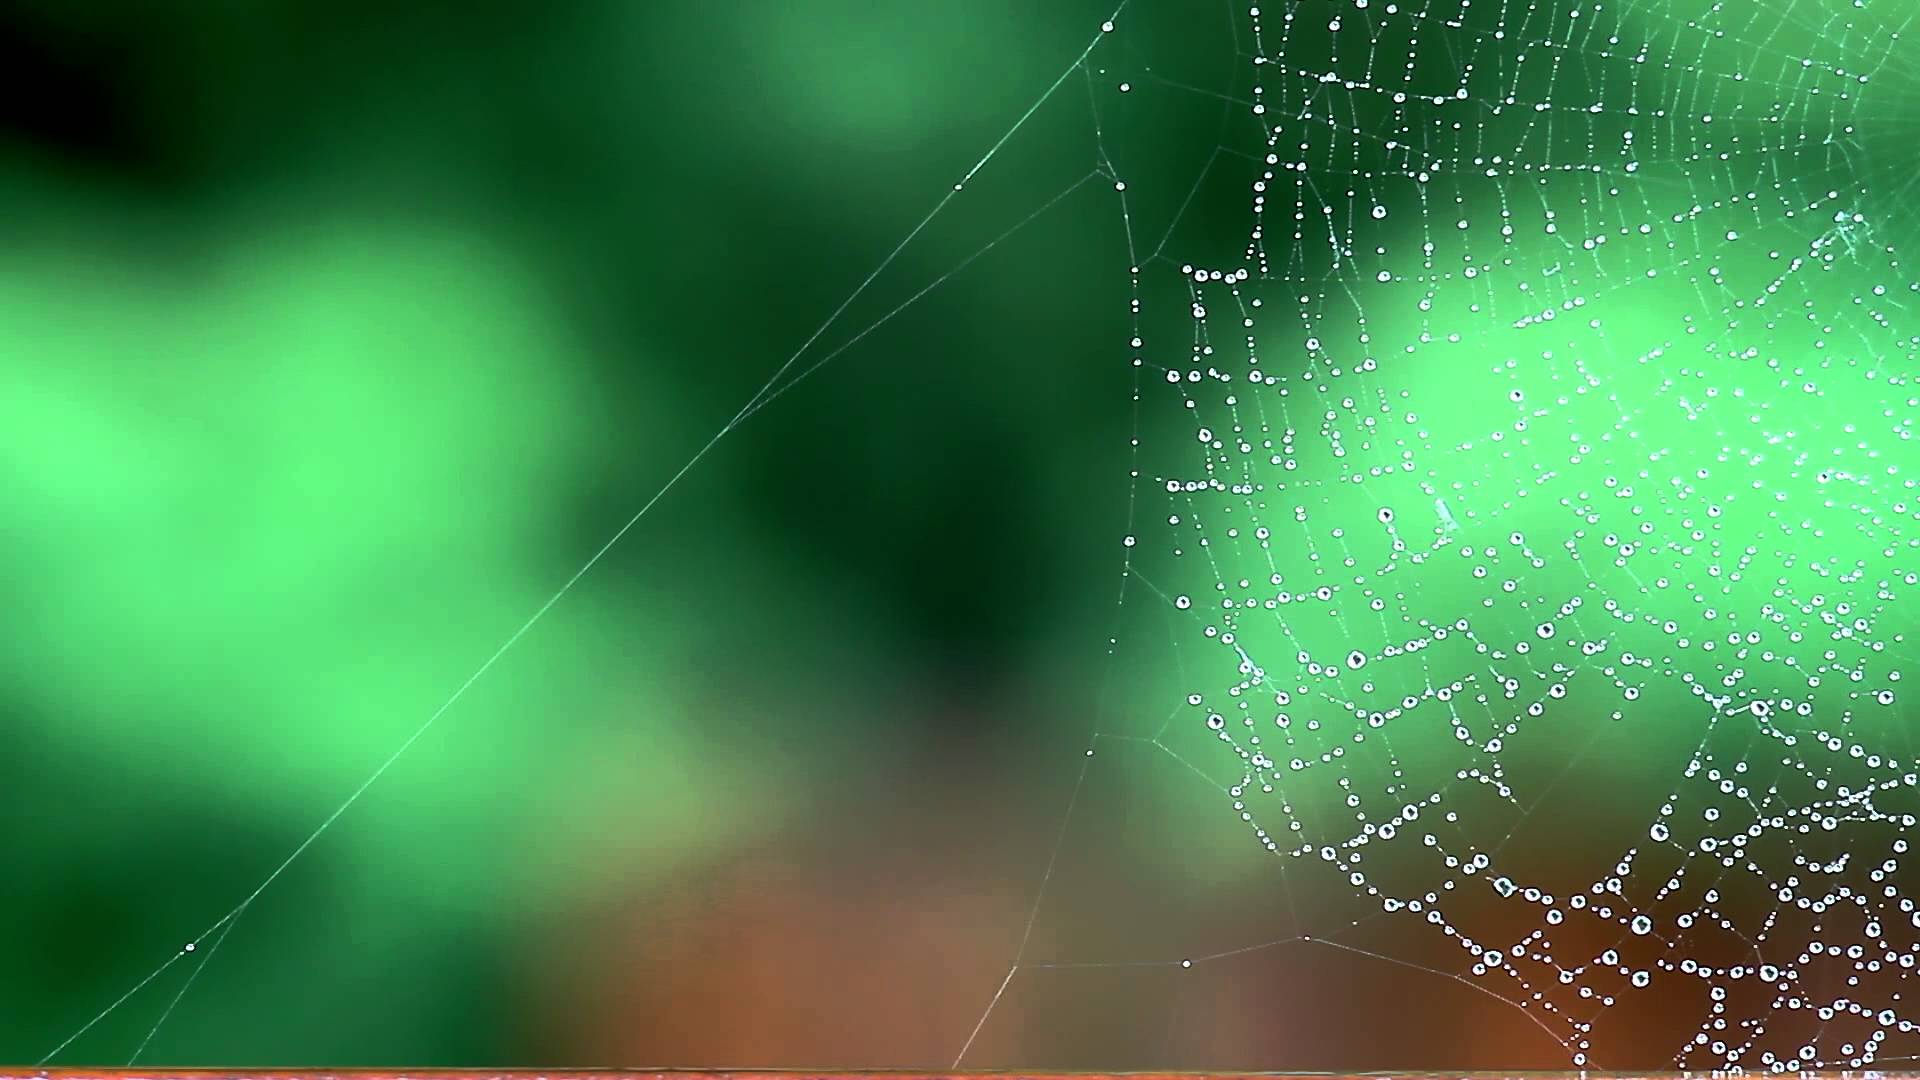 Spider Web Rain Falling in Background | Nature Videos